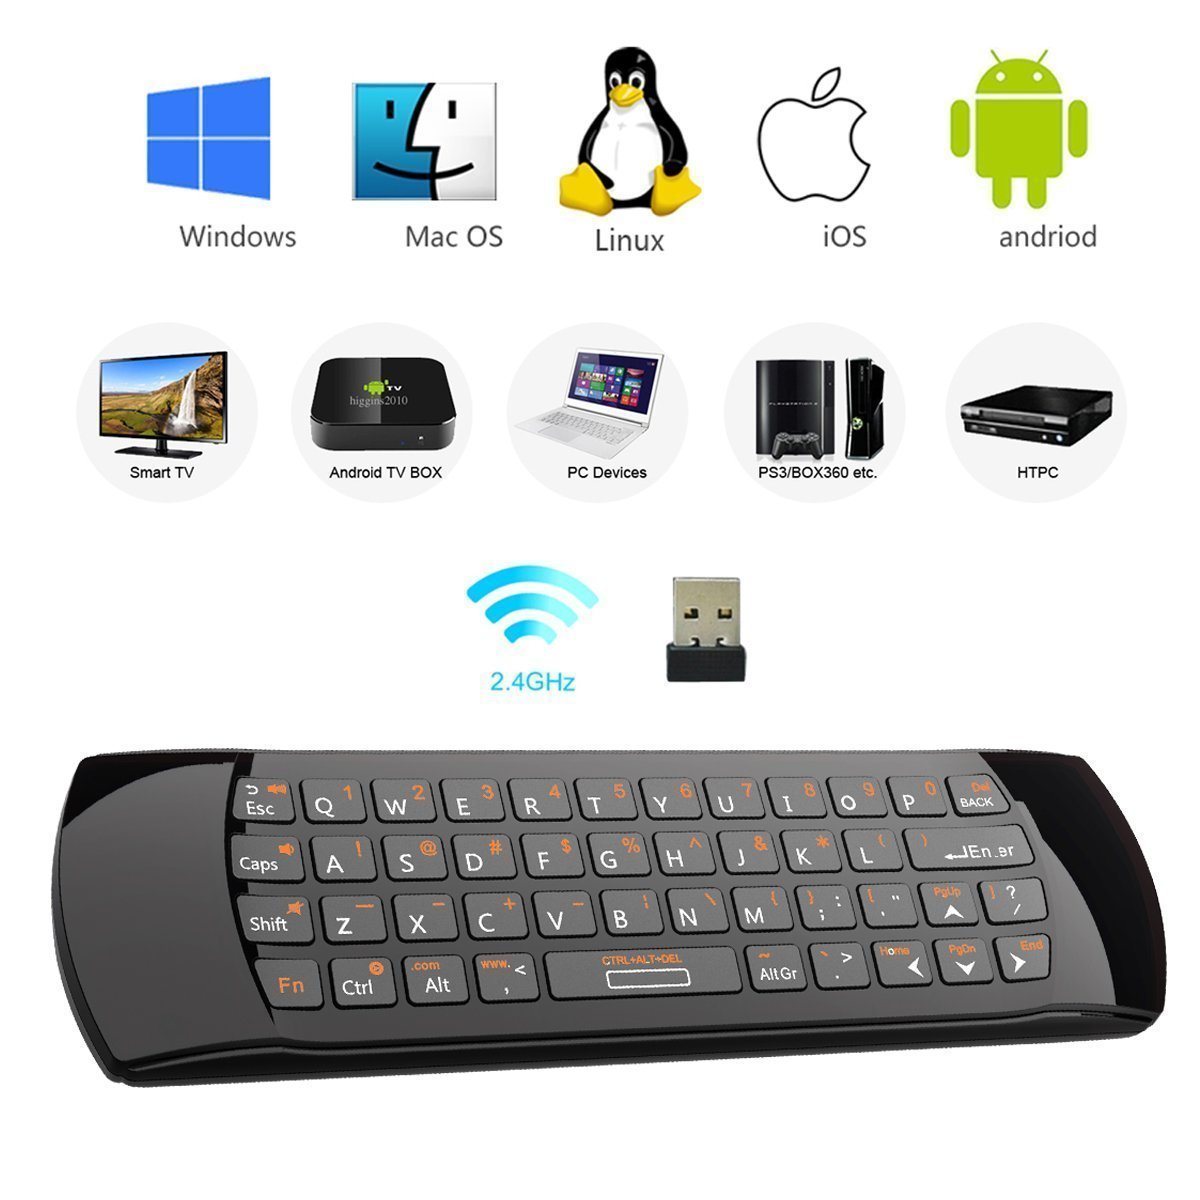 Rii K25 Multifunction Portable 2.4GHz Mini Wireless Fly Mouse Keyboard and Infrared Remote Control with Rechargeable Li-ion Battery (Black)